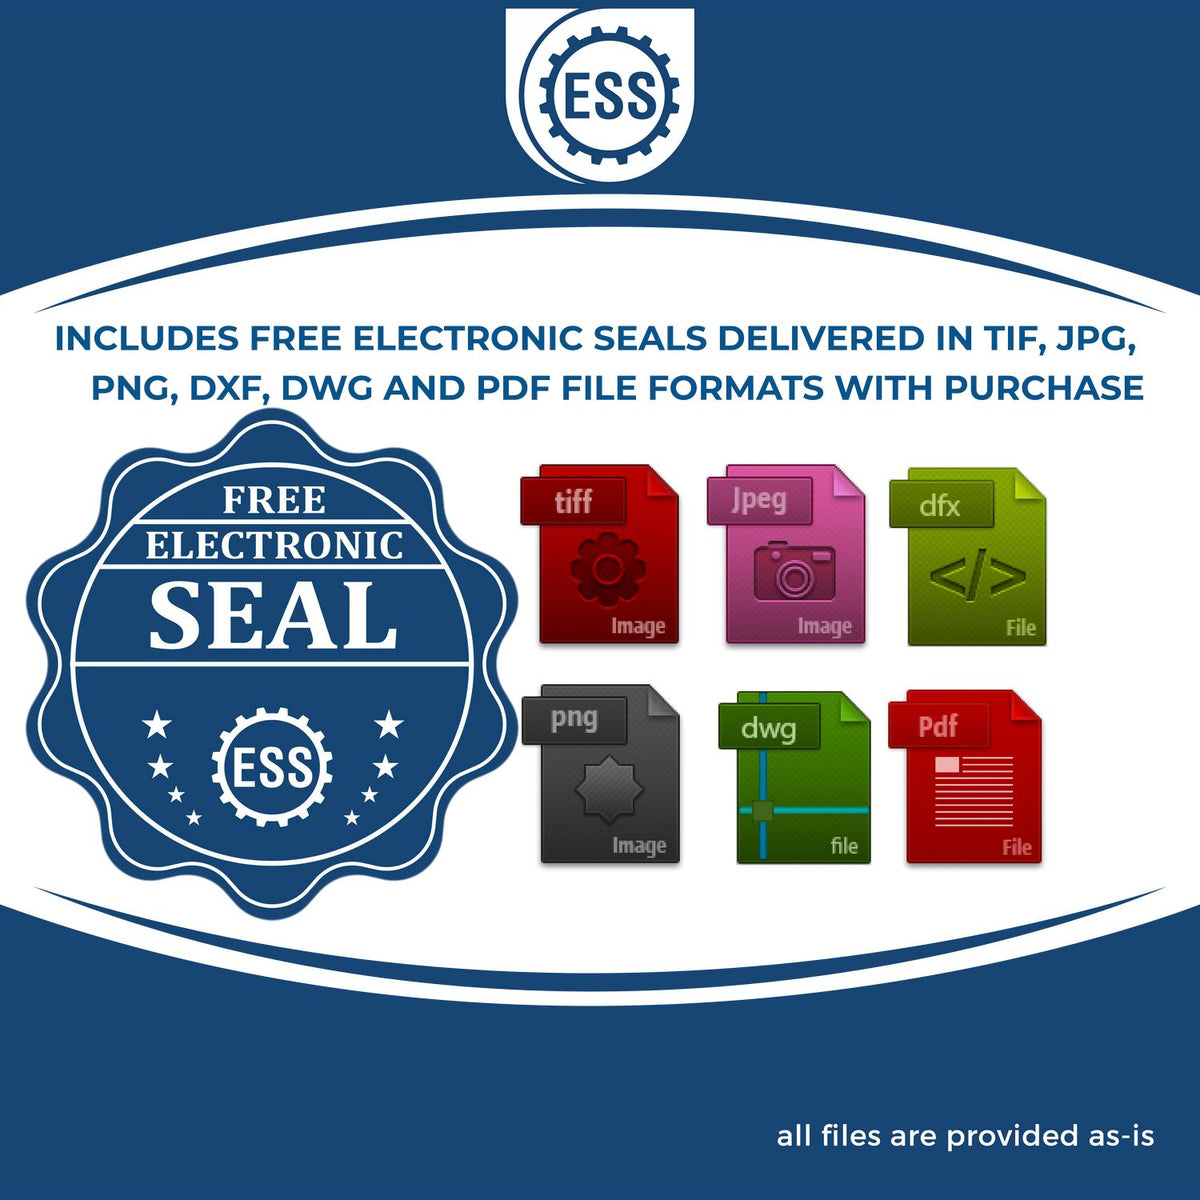 An infographic for the free electronic seal for the Hybrid Montana Engineer Seal illustrating the different file type icons such as DXF, DWG, TIF, JPG and PNG.